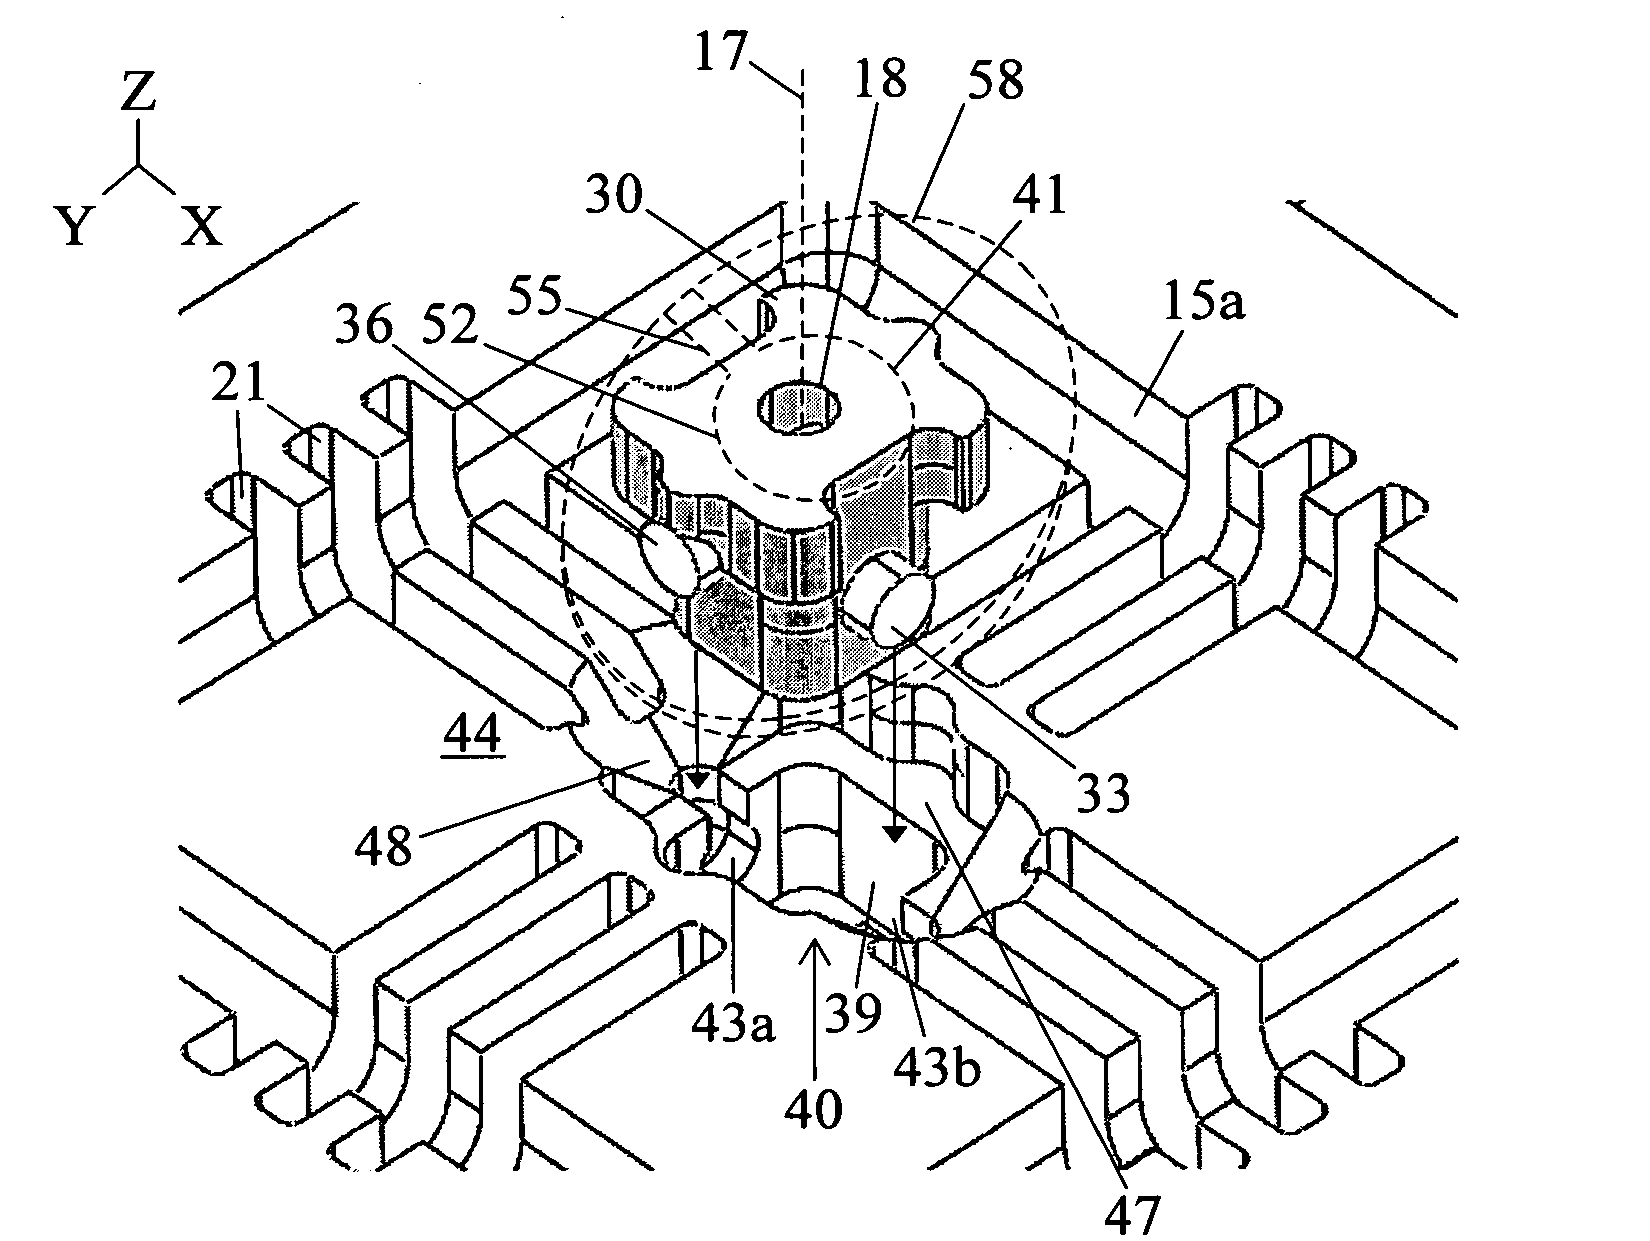 Contact insert for a microcircuit test socket